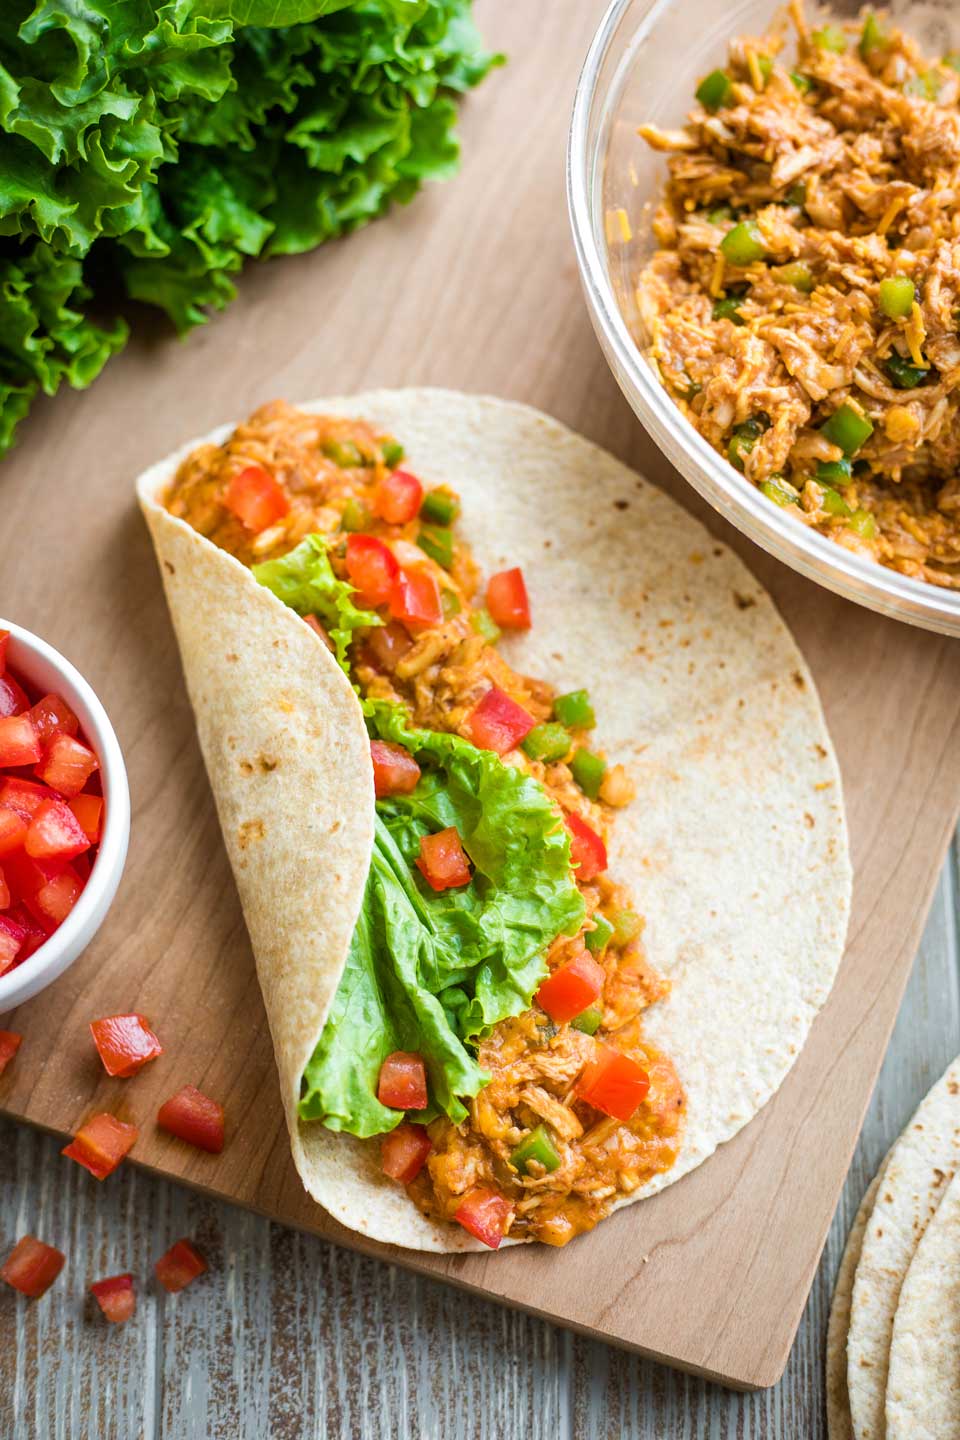 one wrap, assembled on cutting board, with bowls of tomatoes and BBQ chicken mixture alongside